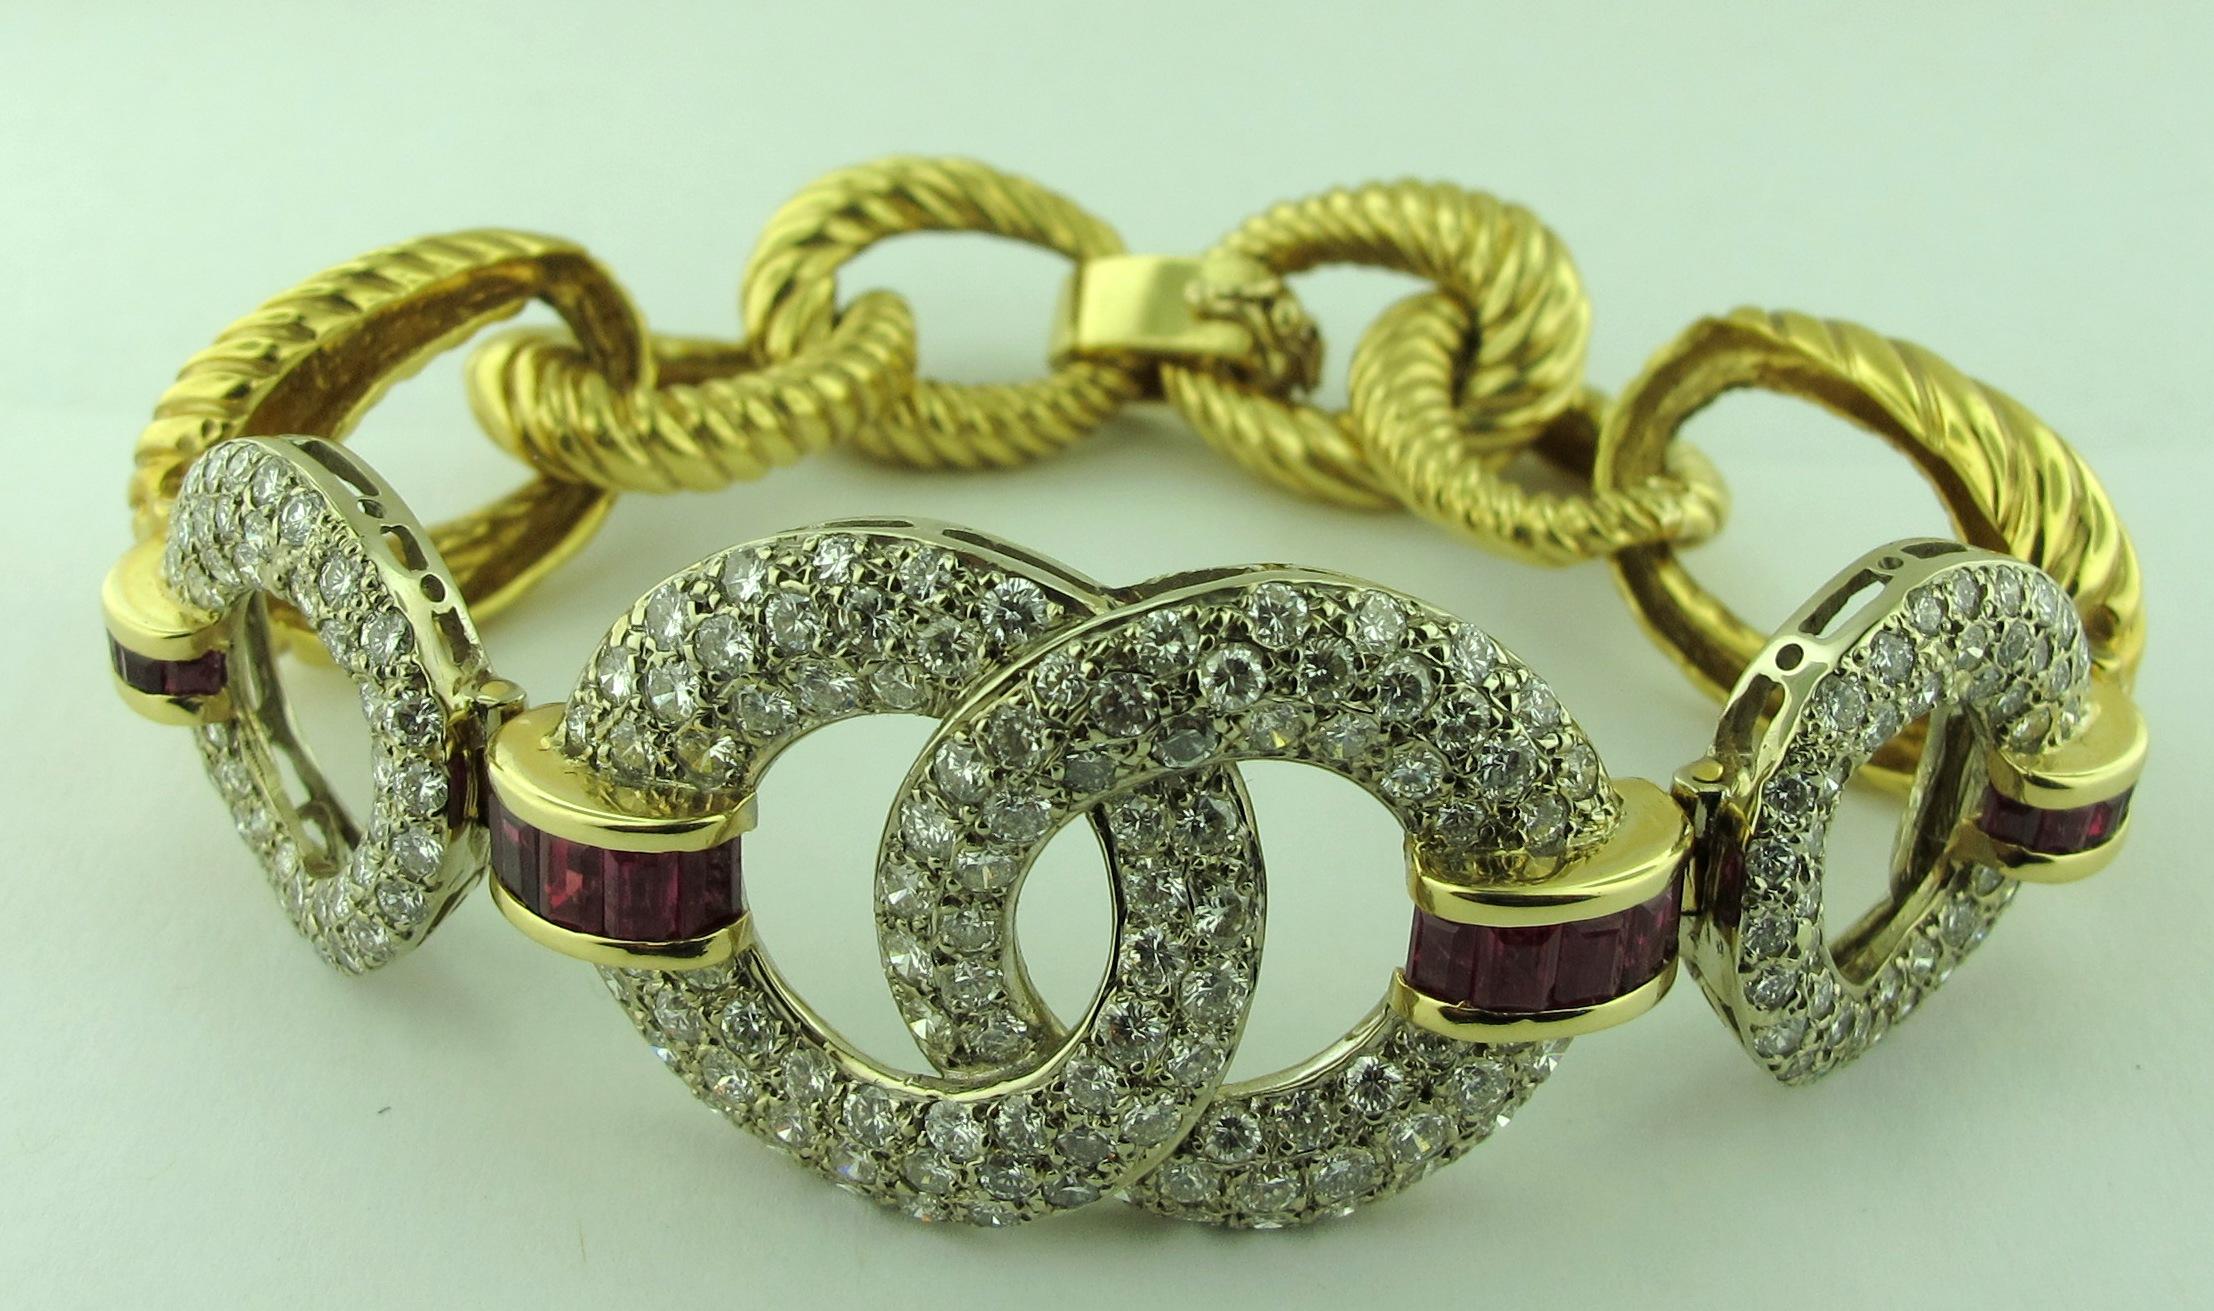 Diamond and Ruby Bracelet set in 14 karat white and yellow gold For Sale 1